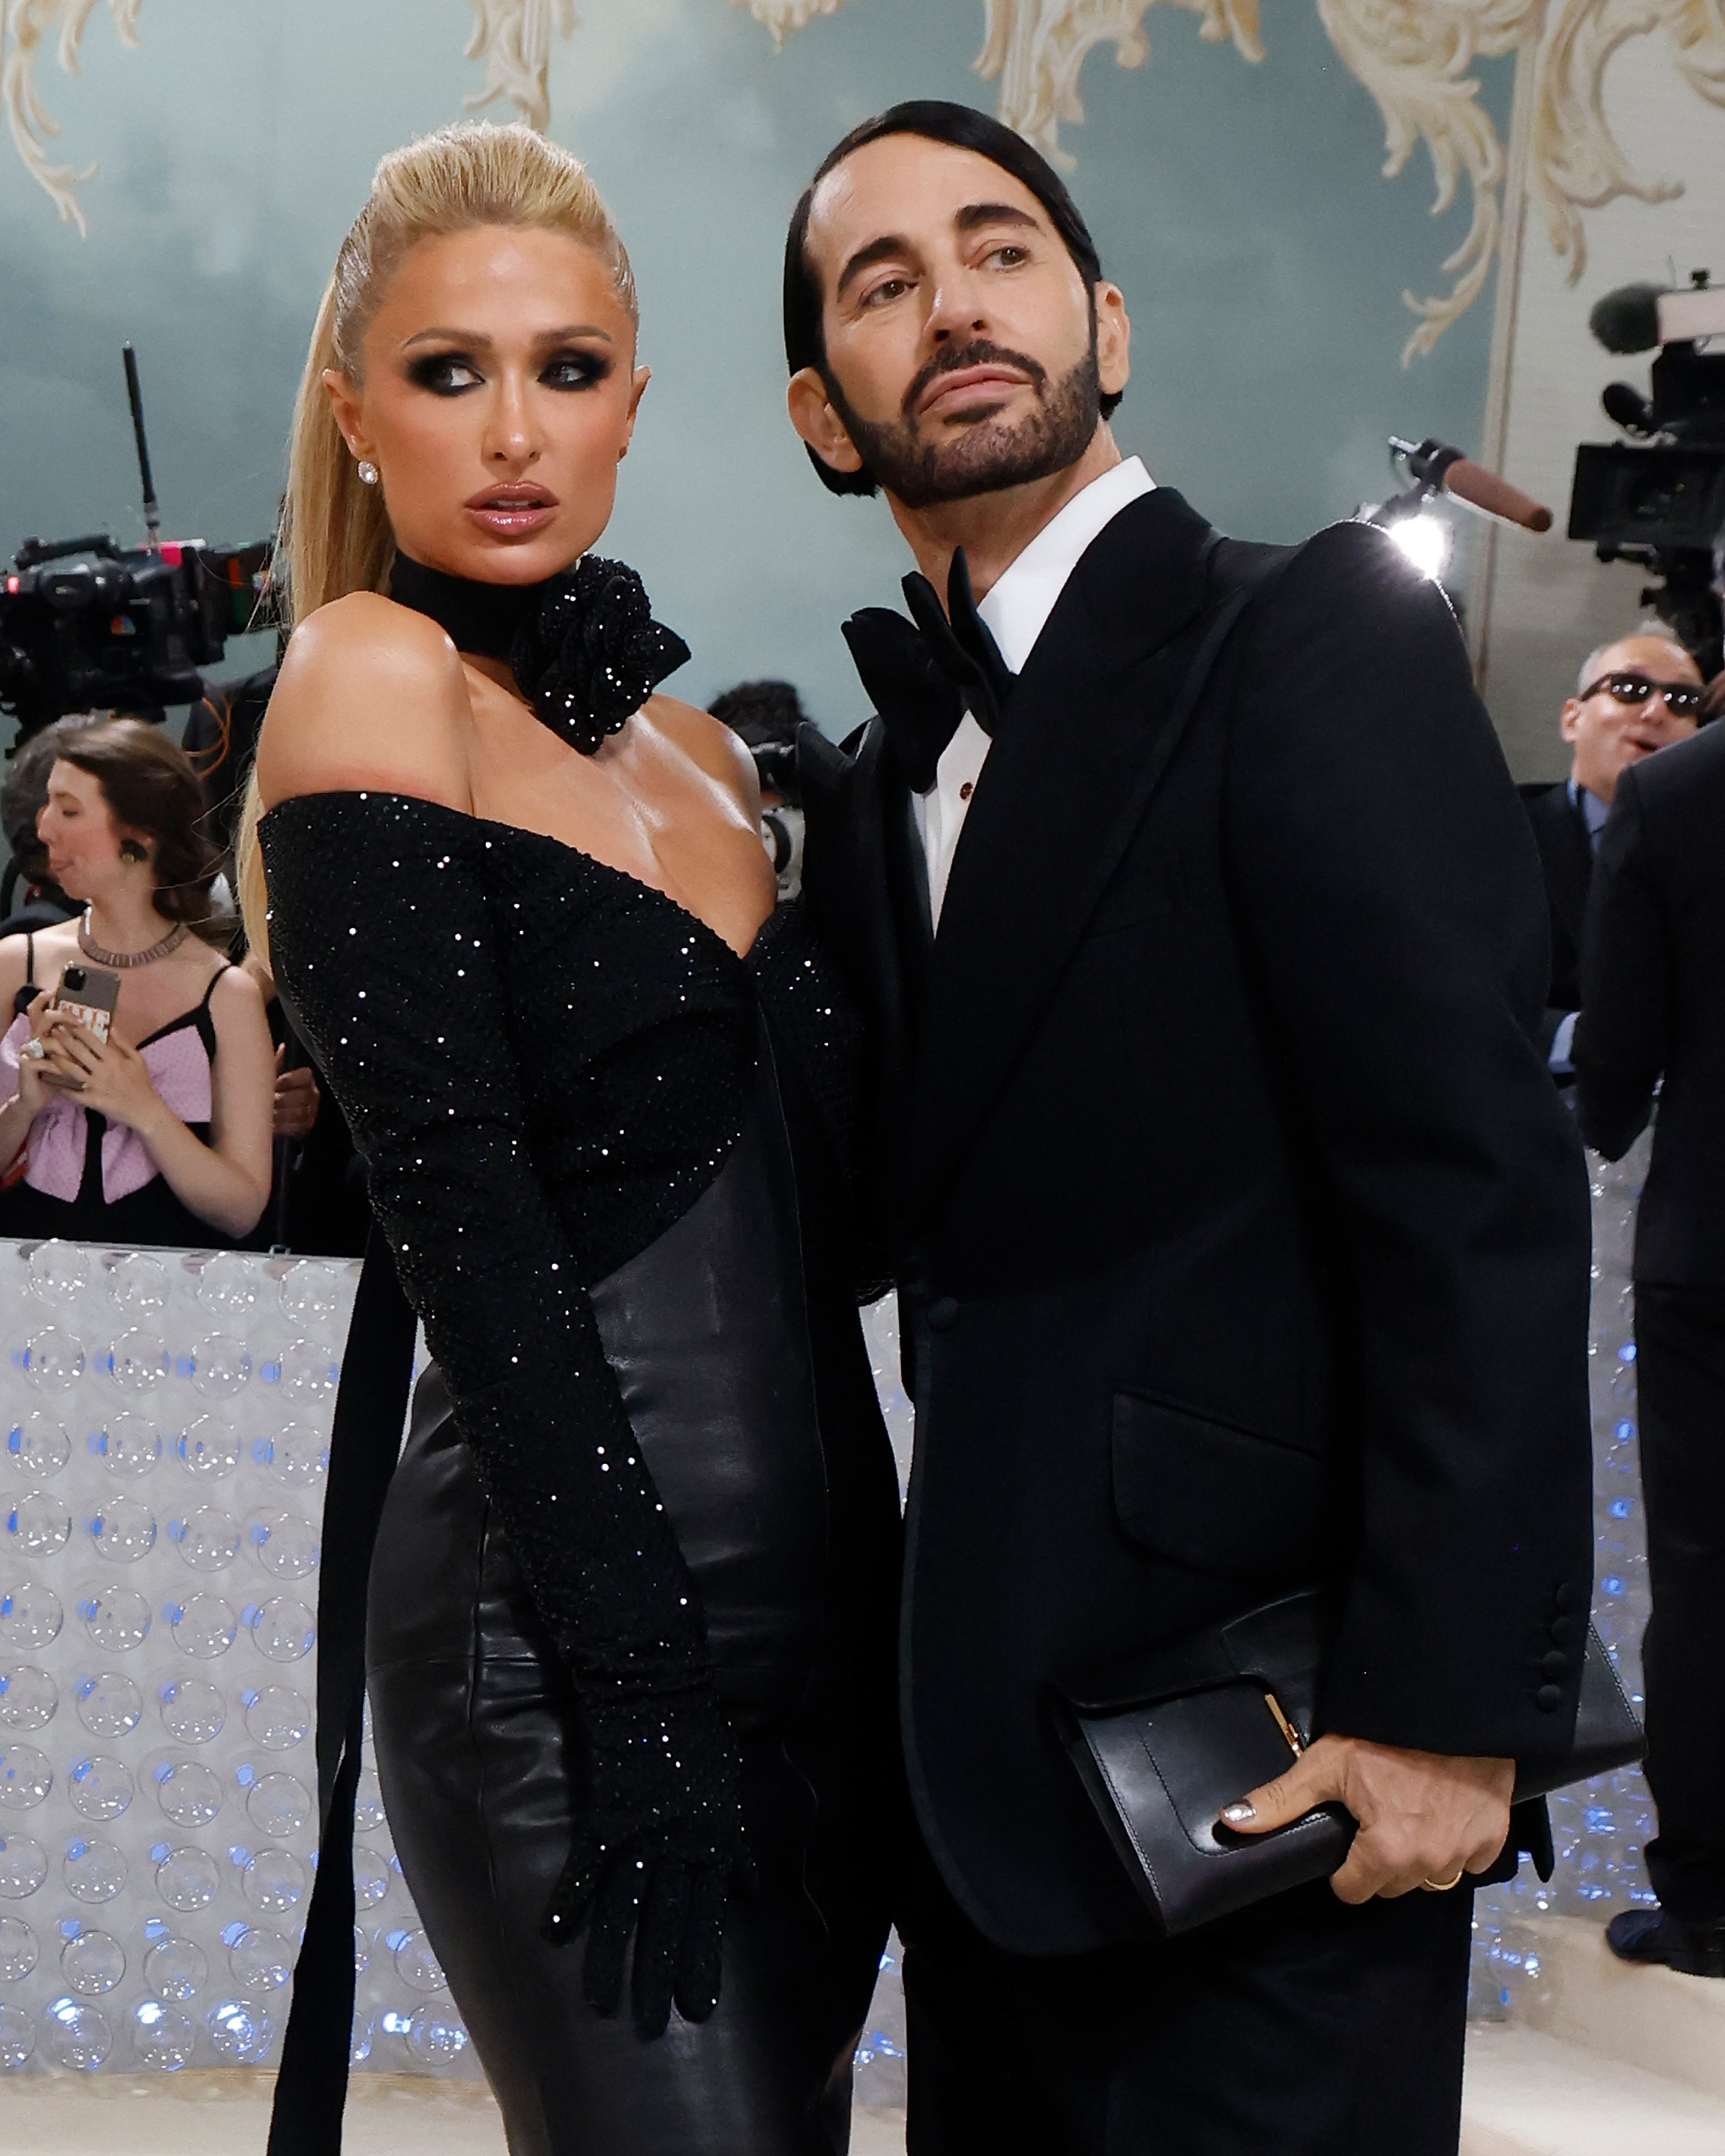 Paris Hilton and Marc Jacobs attend the Costume Institute Benefit celebrating "Karl Lagerfeld: A Line of Beauty" at Metropolitan Museum of Art in New York City, on May 1, 2023. | Source: Getty Images